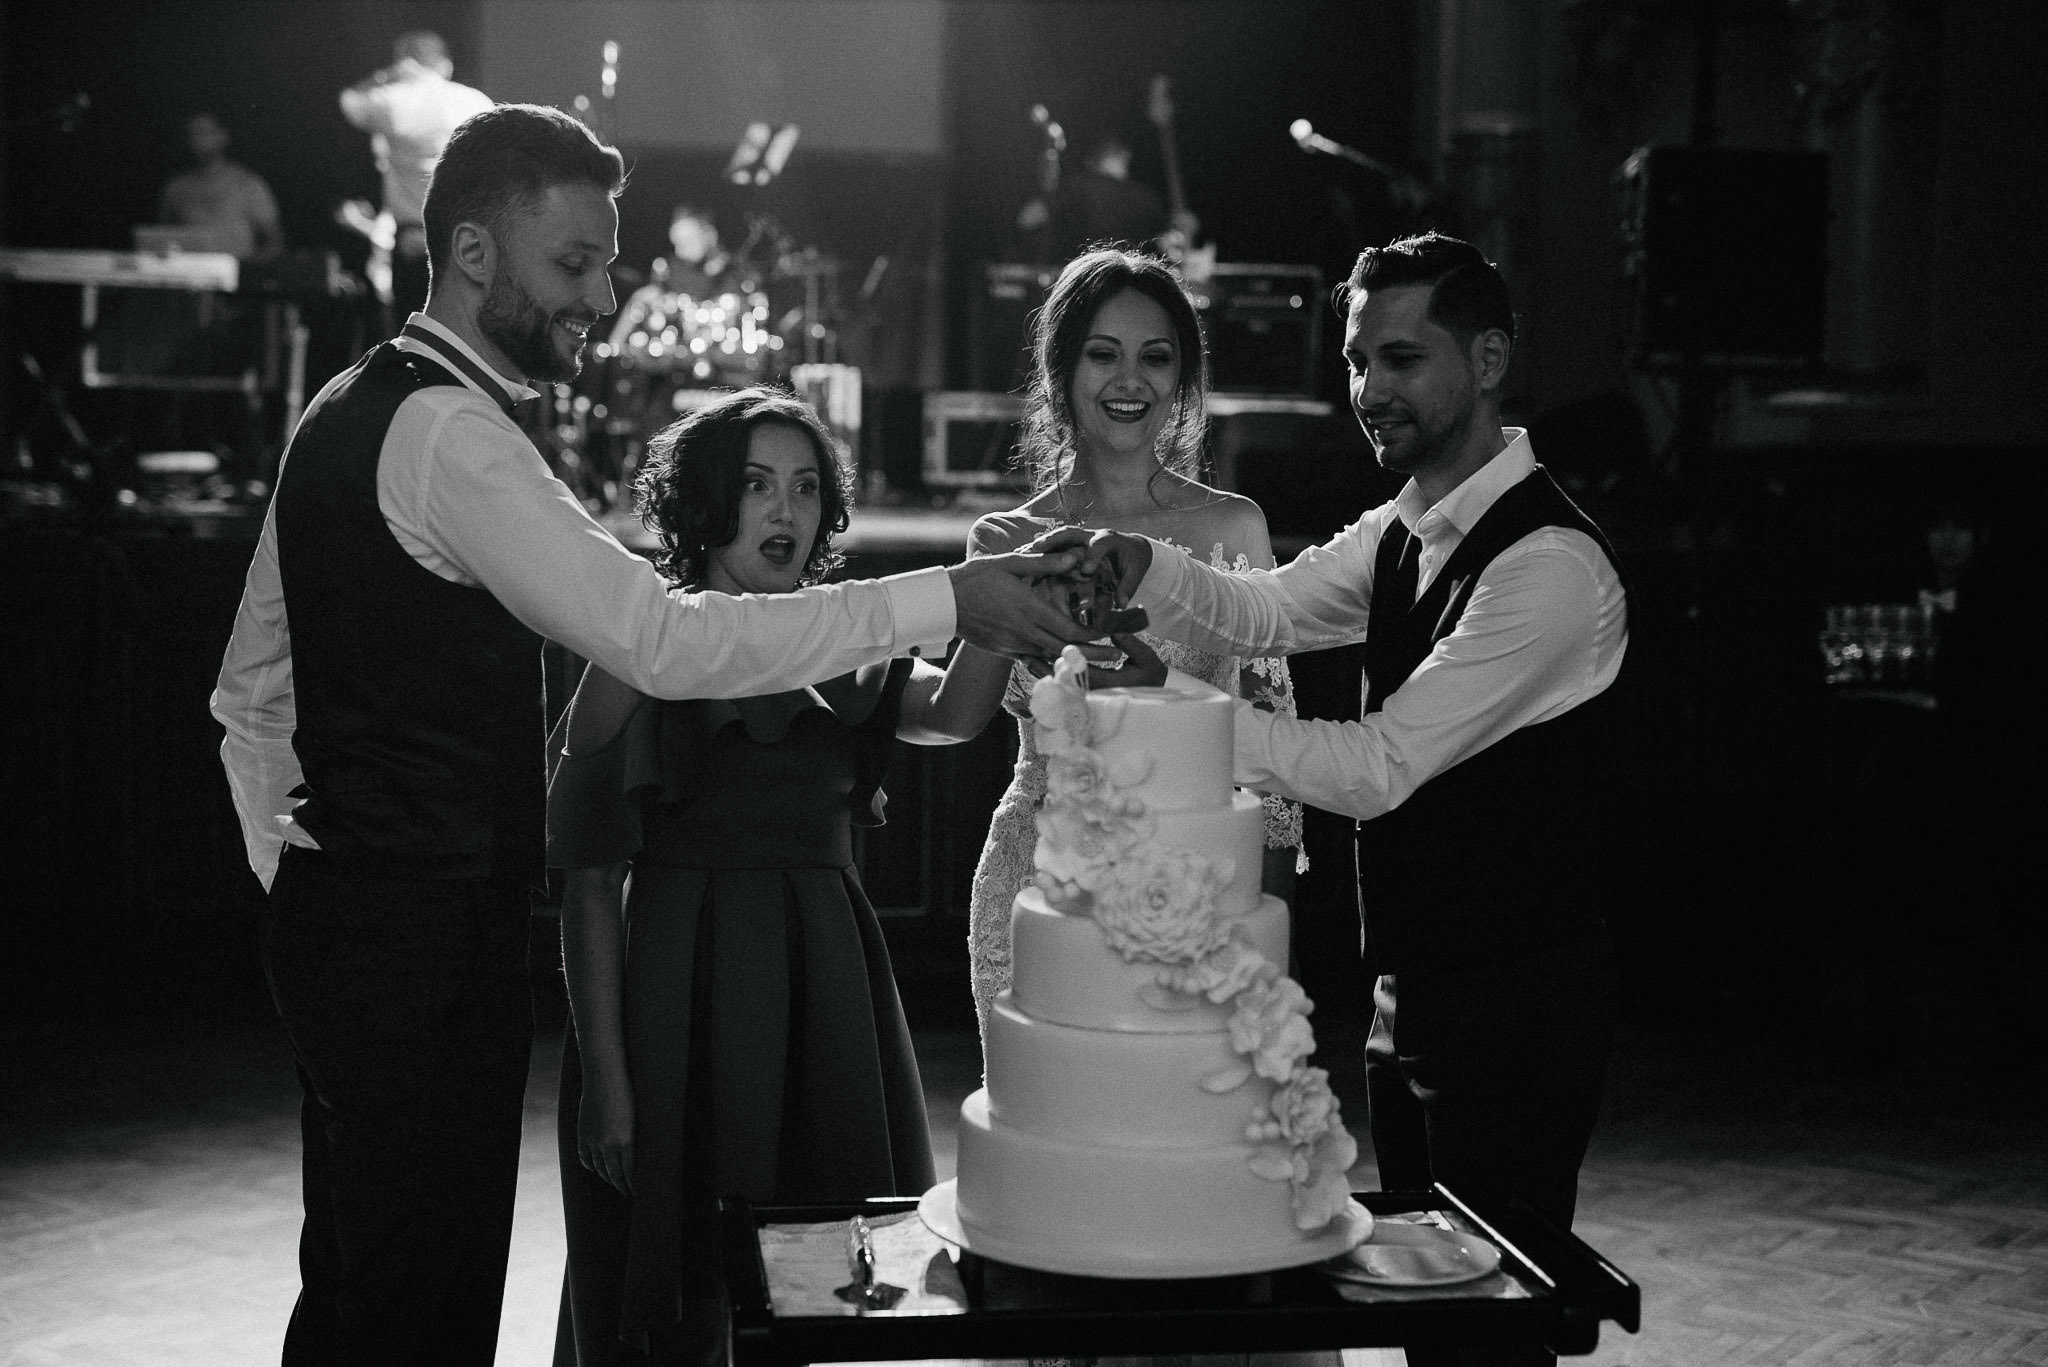 bride and groom cut their wedding cake together with their godparents